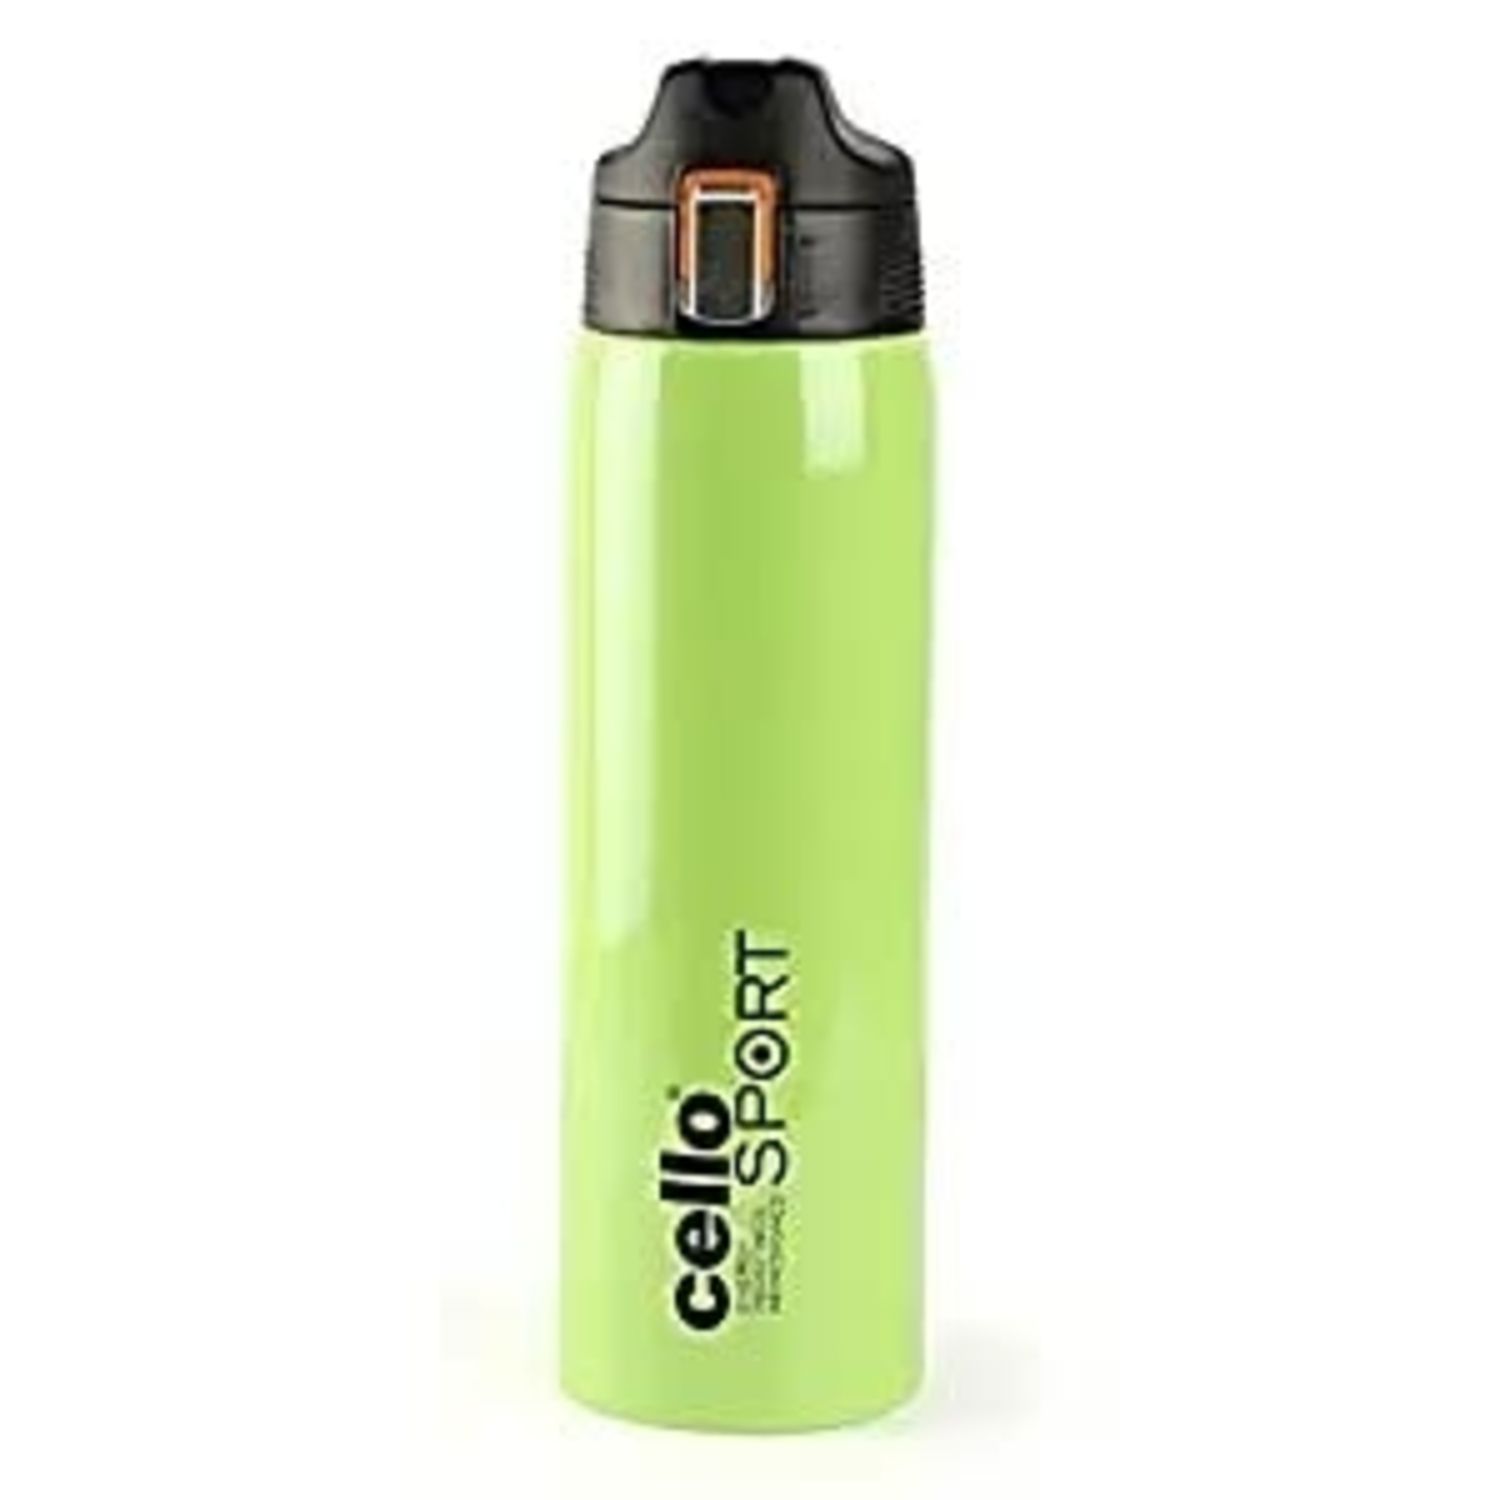     			Cello Skipper Stainless Steel Double Walled Hot and Cold Water Bottle, 750 ml, Green